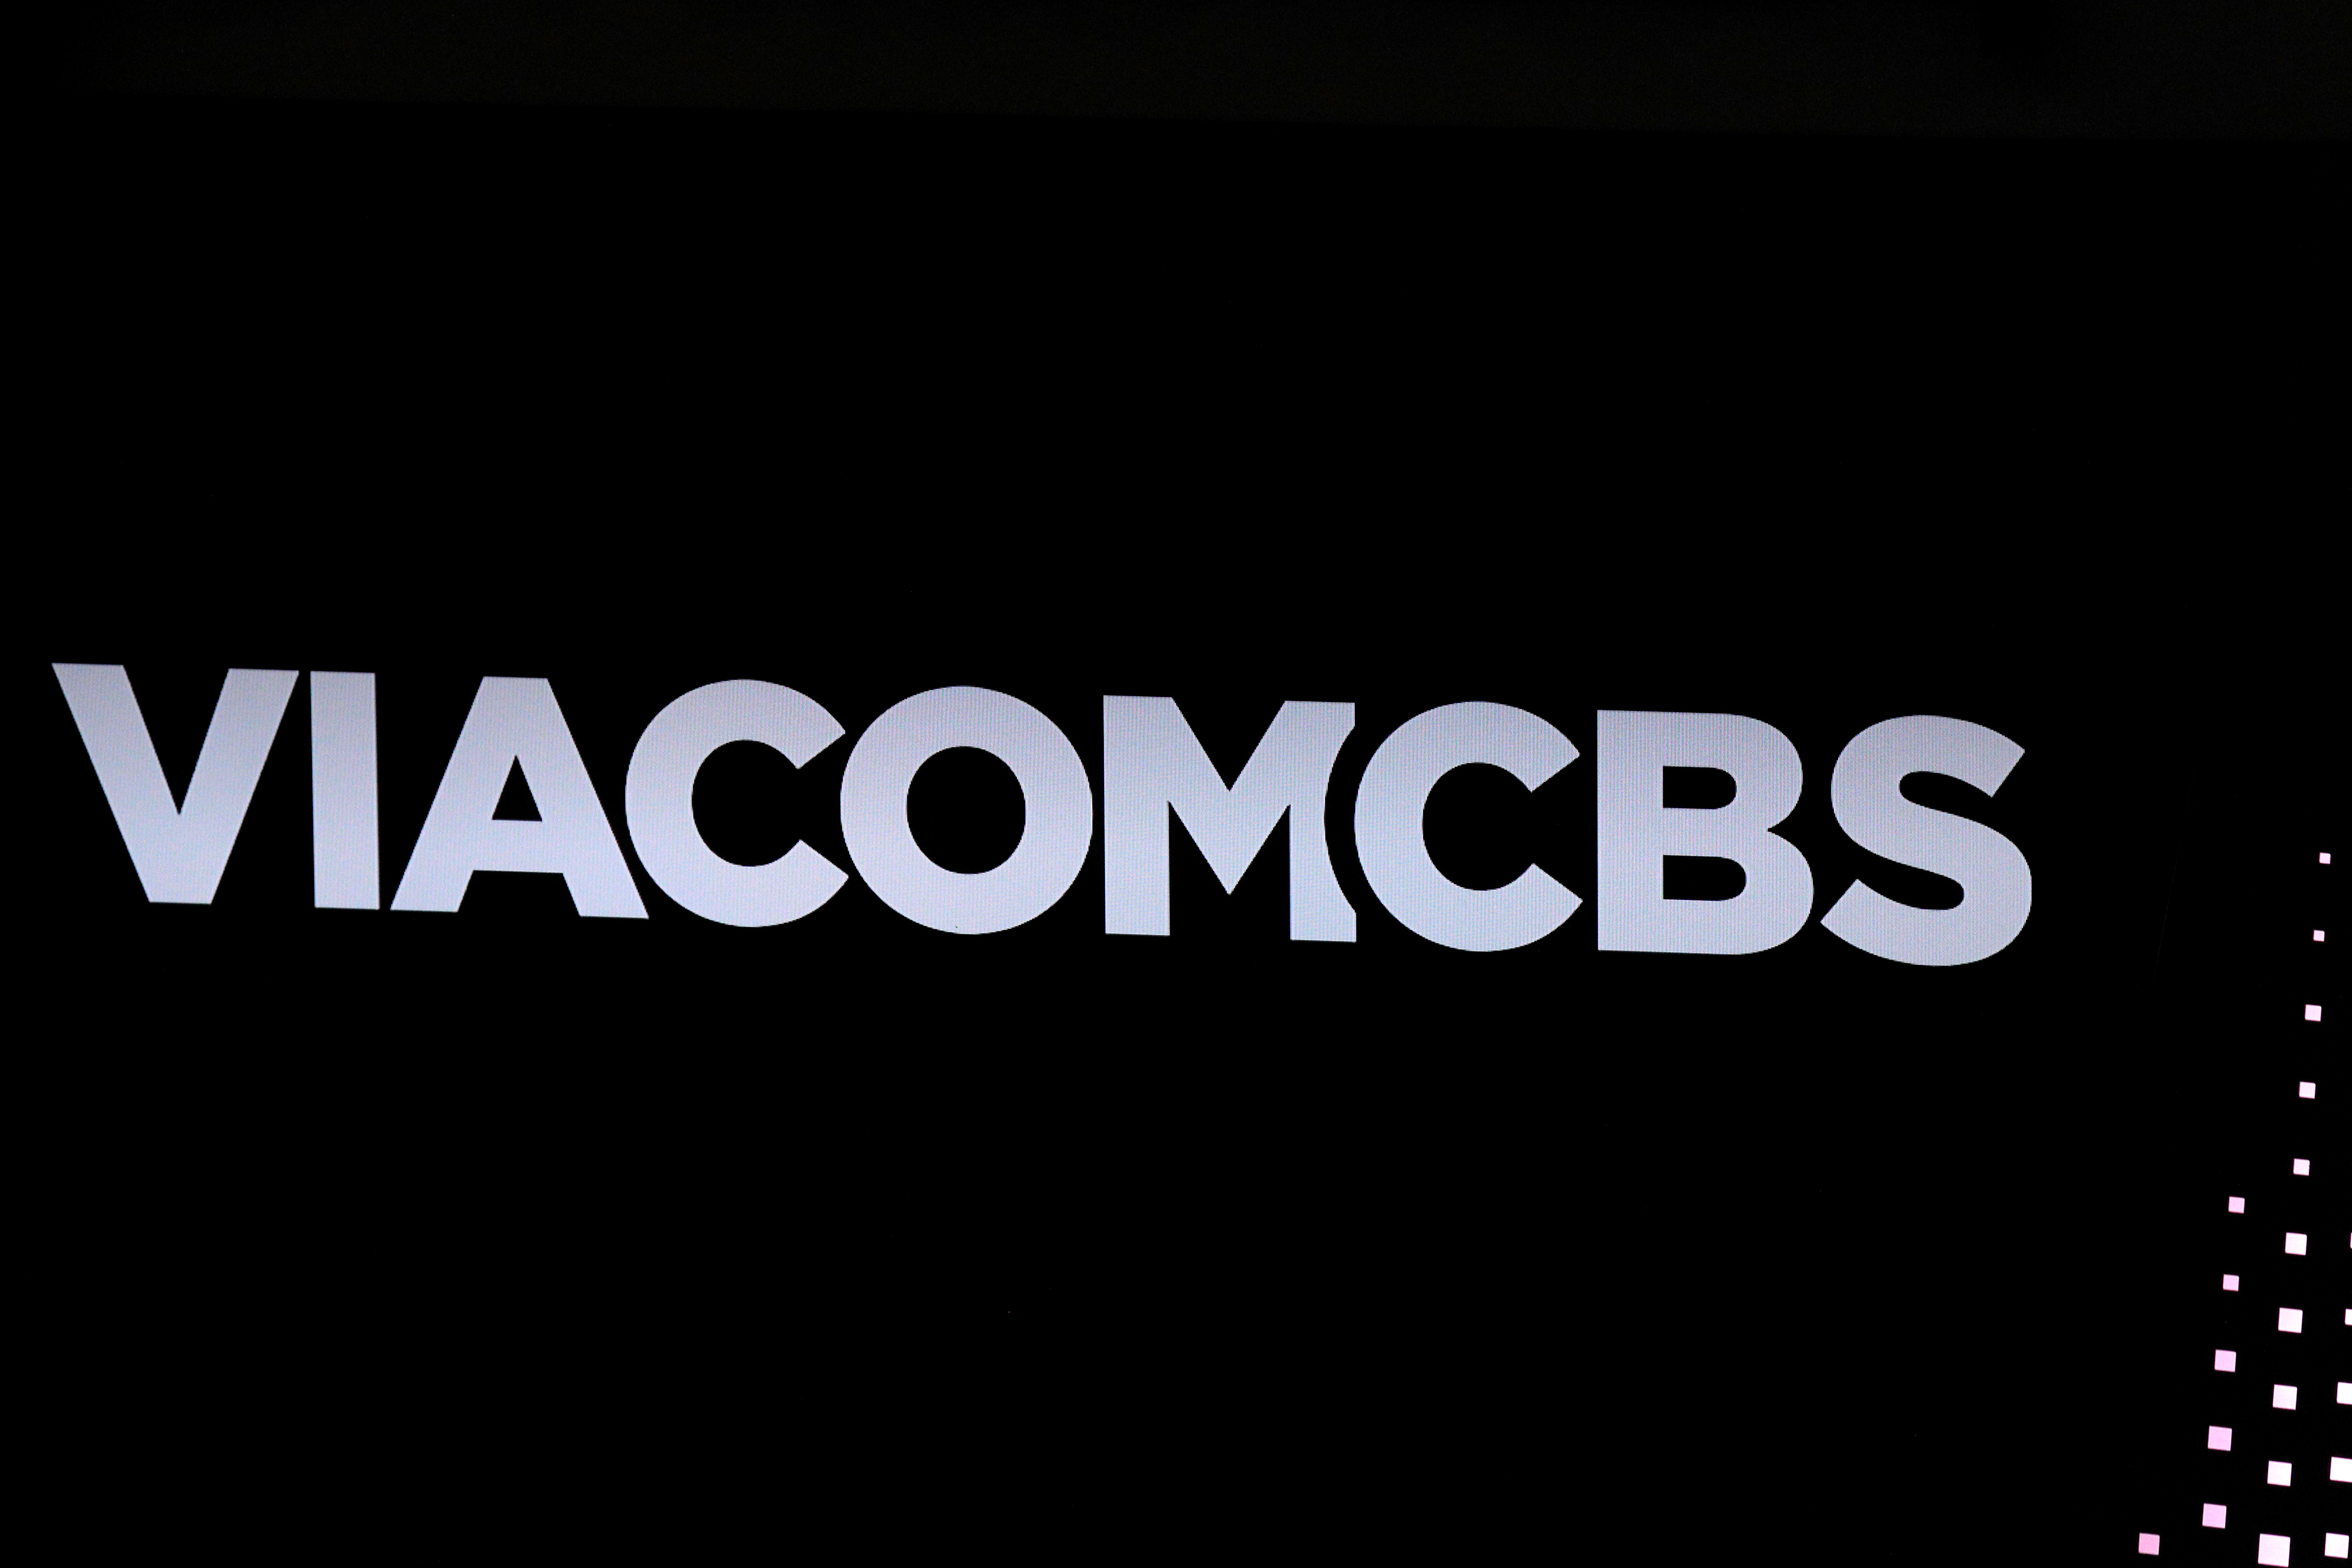 The ViacomCBS logo is displayed on the Nasdaq MarketSite to celebrate the company's merger, in New York